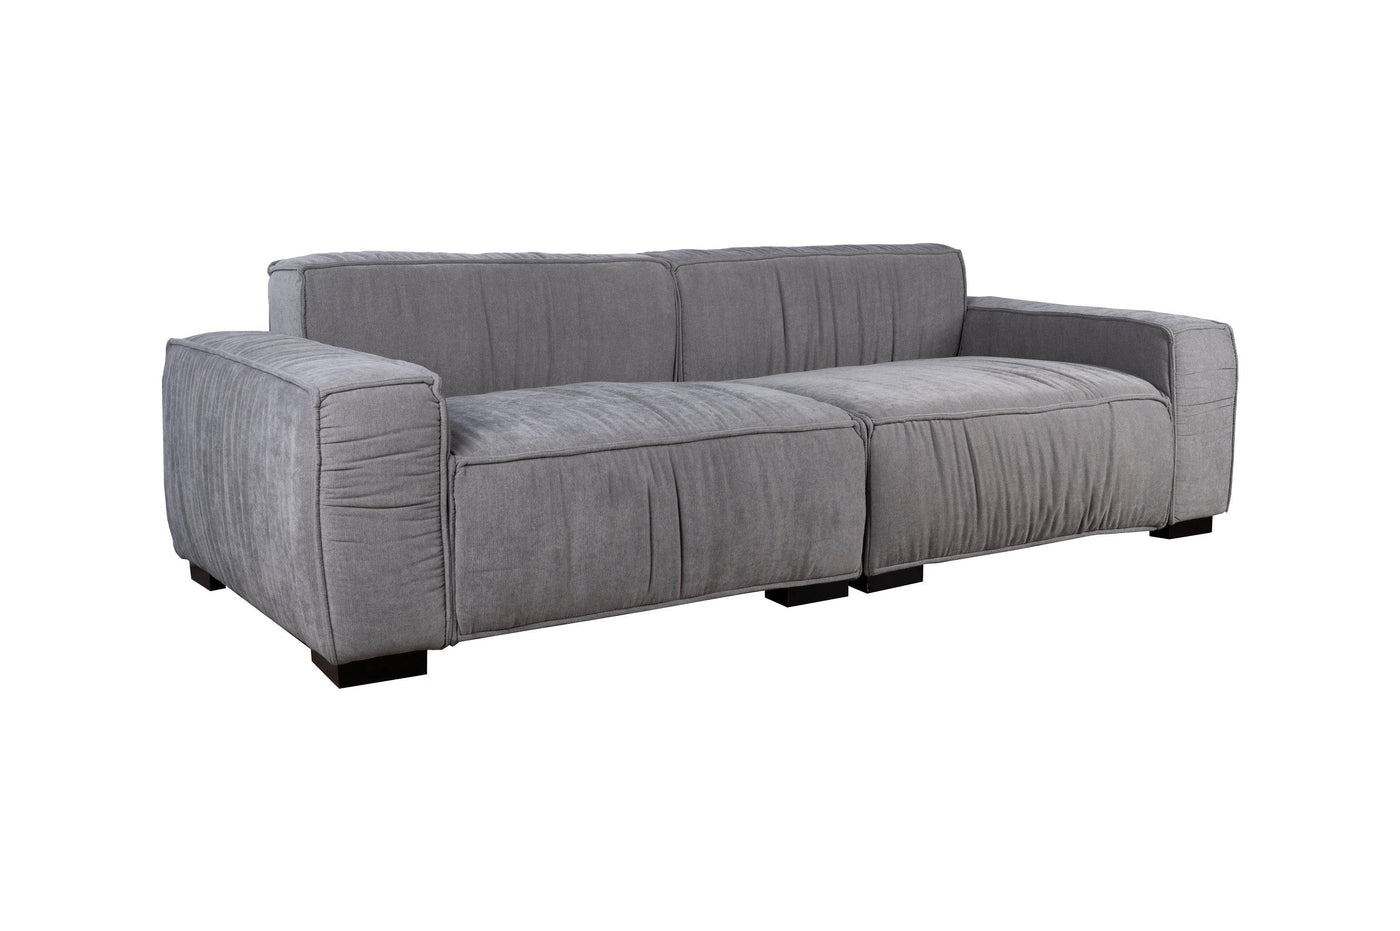 Oliver 2 Seater Sofa Hoya Casa Hoyacasa.ca couch sofa bed 4 seater sectional table kitchen table love seat sofa bed matress Toronto Canada manufactures home decoration frames indoor Ottoman sale